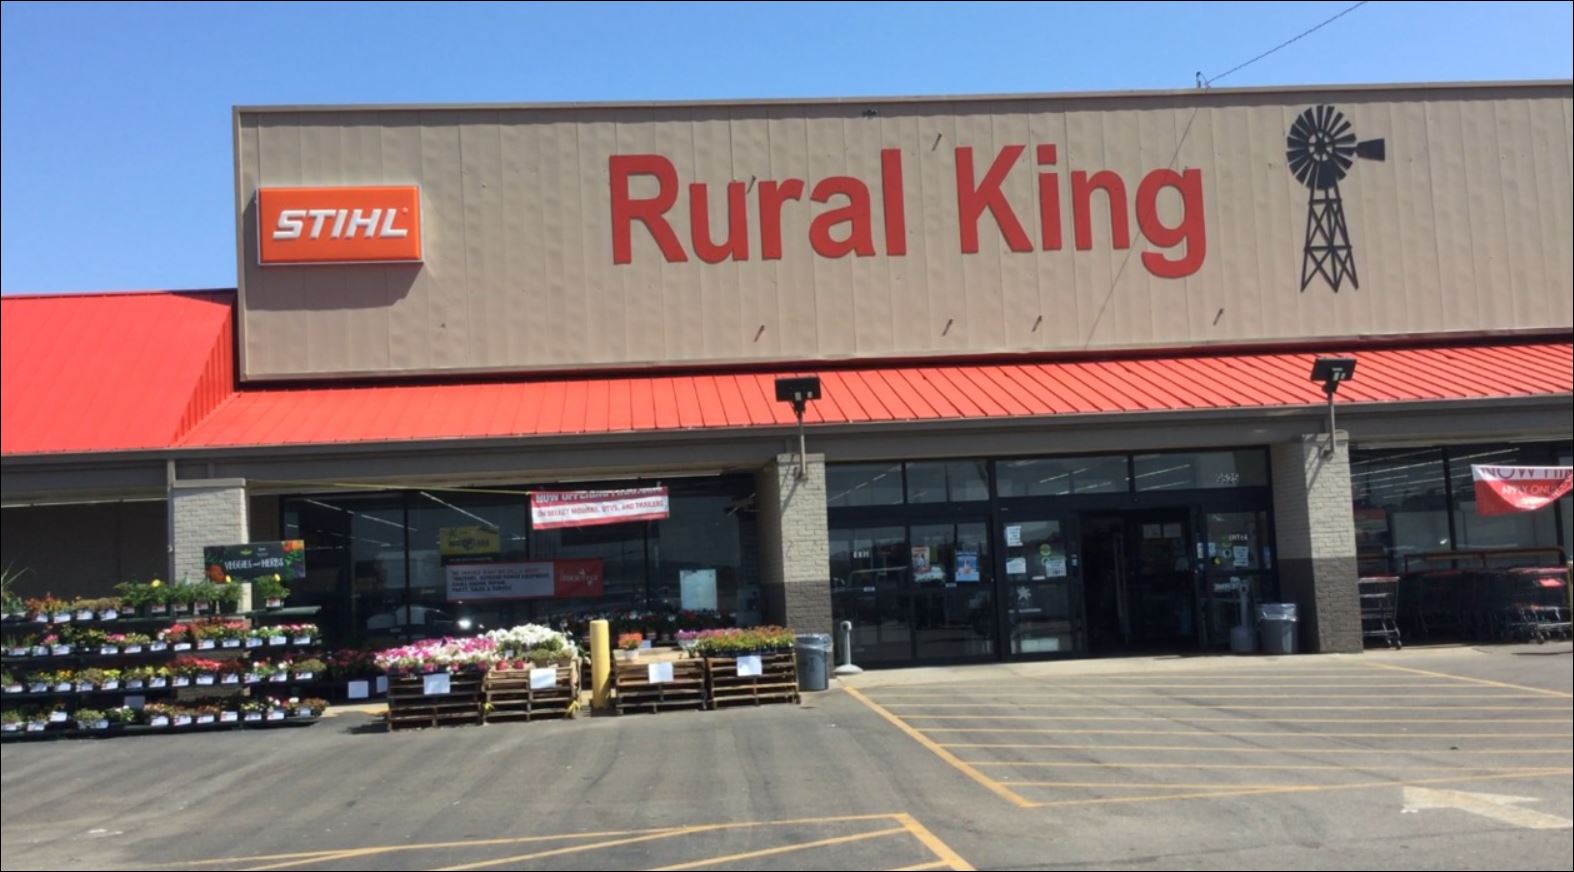 Rural king america's farm and home store